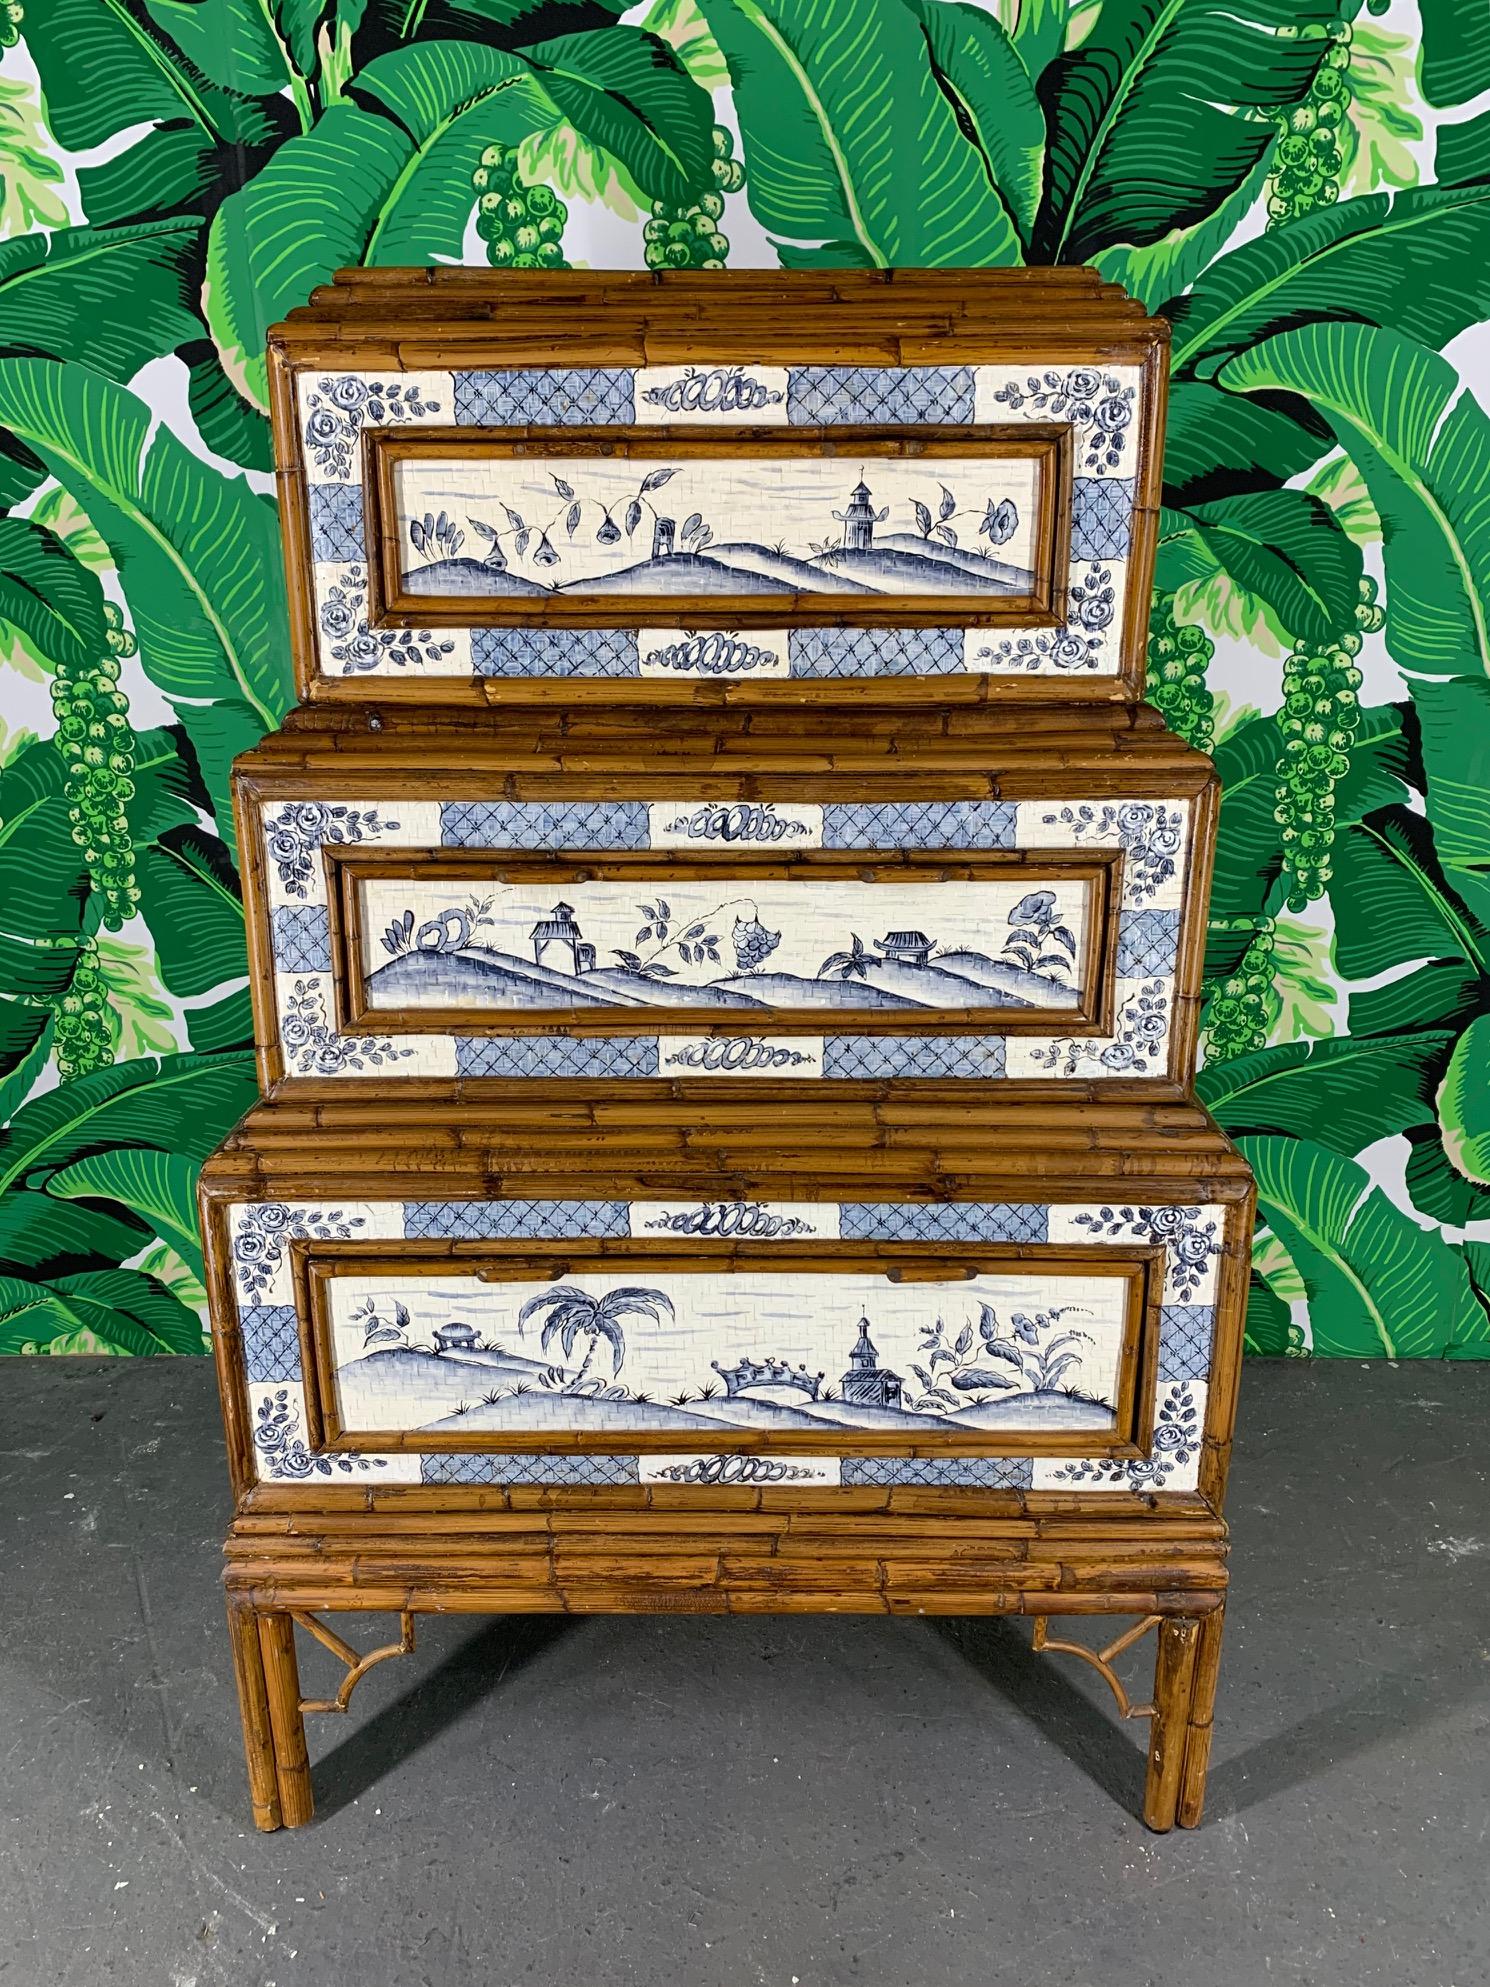 Asian style stacked dresser features hand painted detailing and geometric rattan overlay. Back is also finished in rattan, circa 1950s. Good vintage condition with minor imperfections consistent with age.